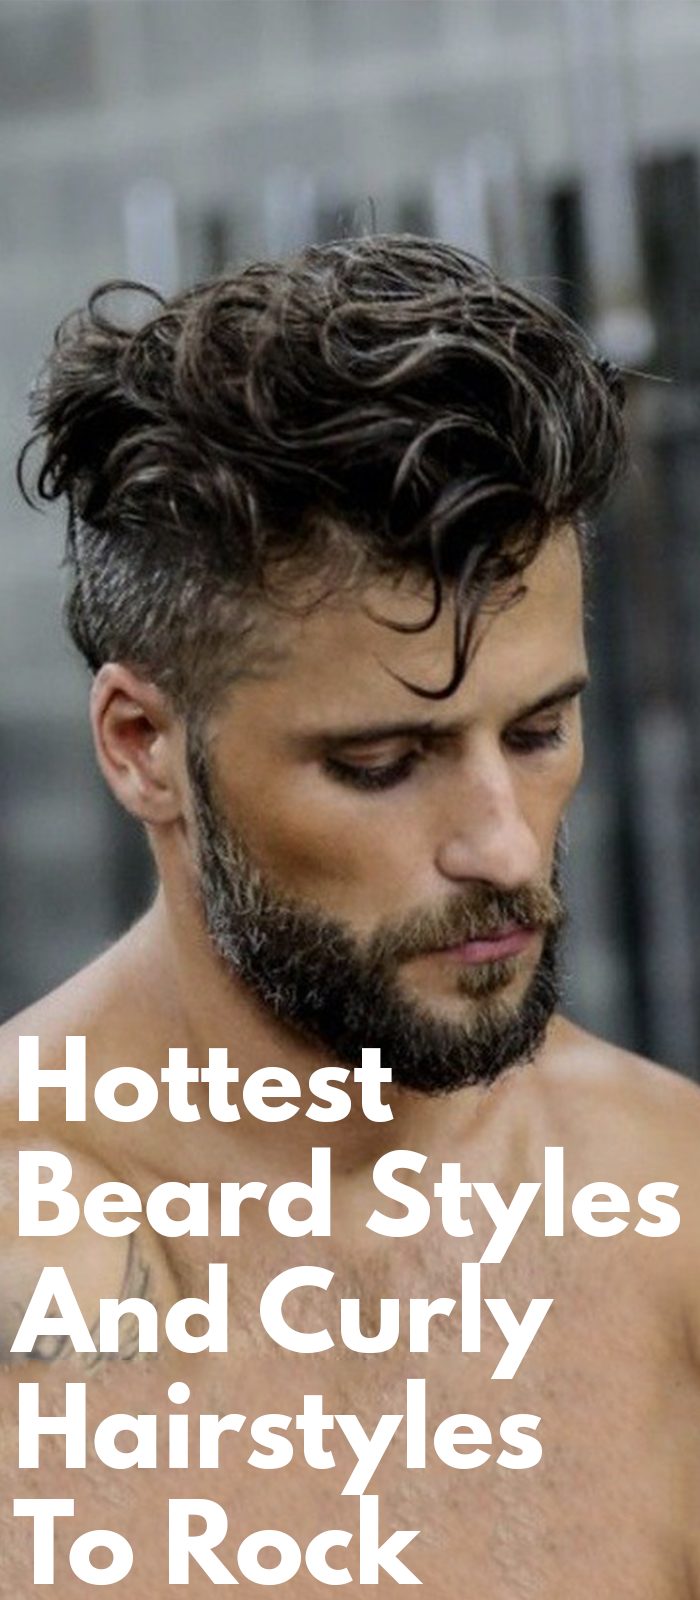 Hottest Beard Styles And Curly Hairstyles To Rock. ⋆ Best Fashion Blog For  Men 